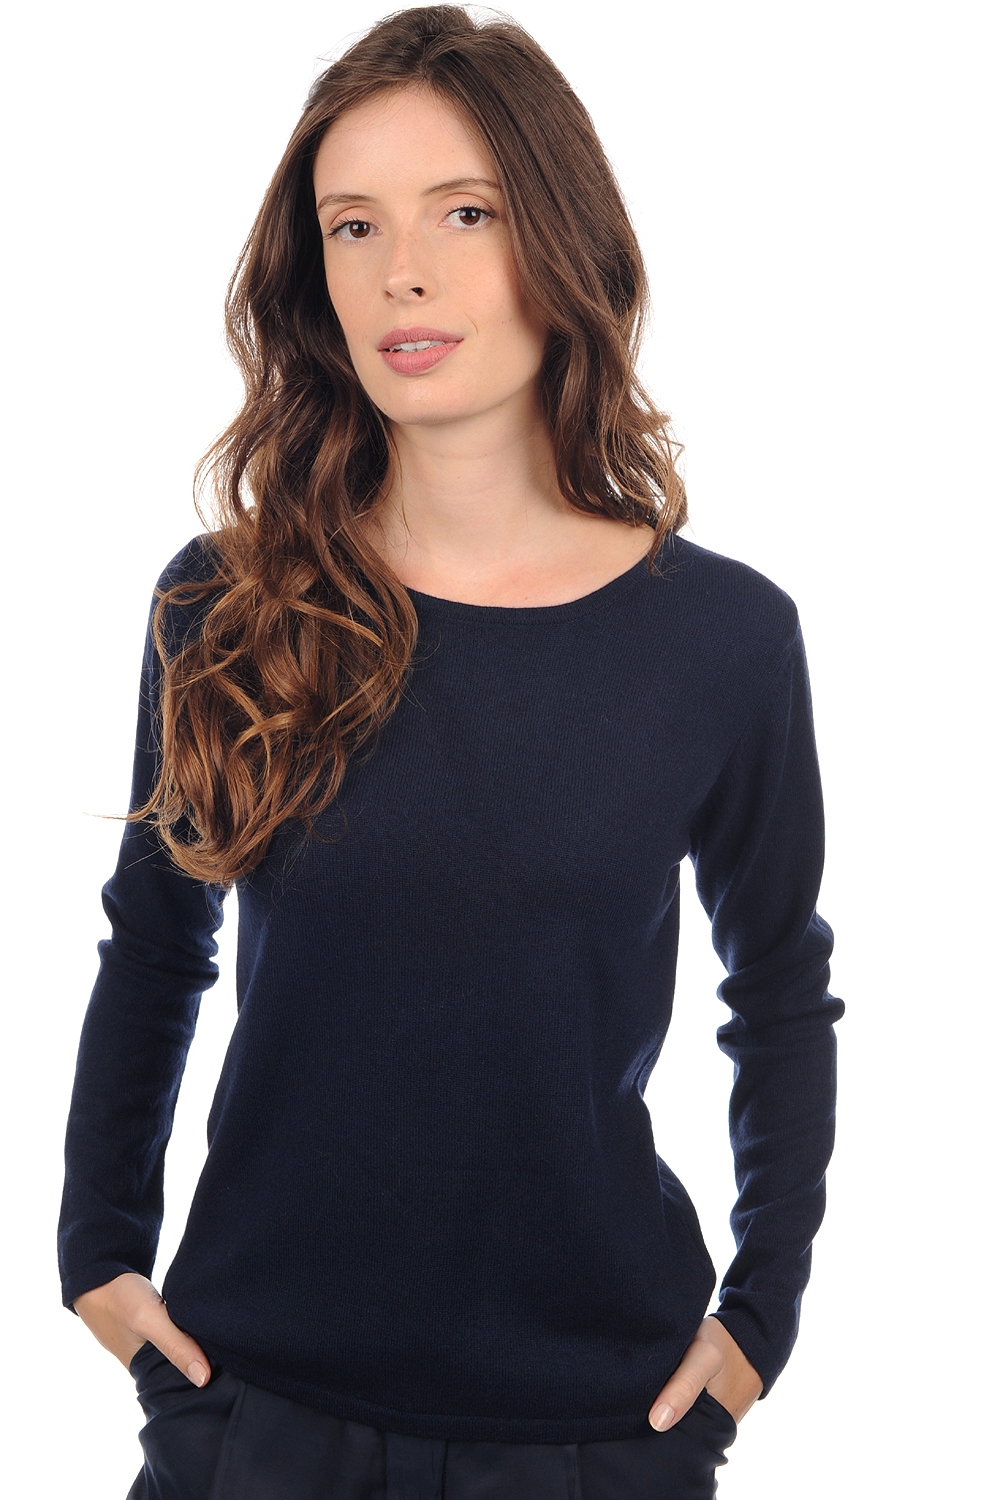 Cachemire pull femme col rond solange marine fonce 4xl